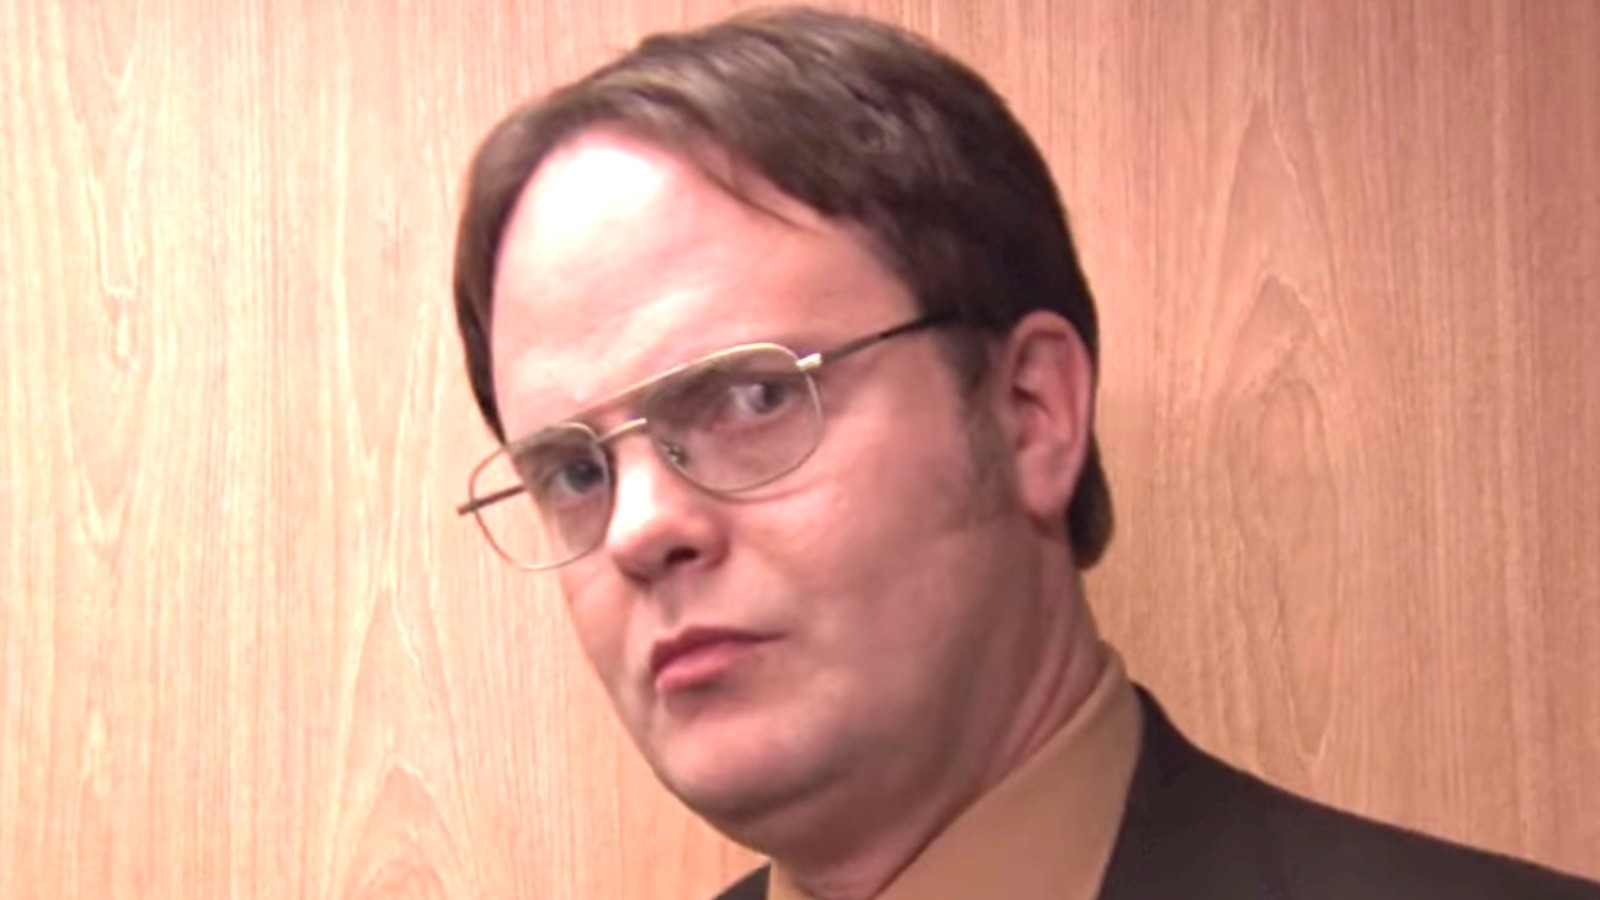 We Finally Know How The Office Pulled Off The Iconic Fire Drill Scene